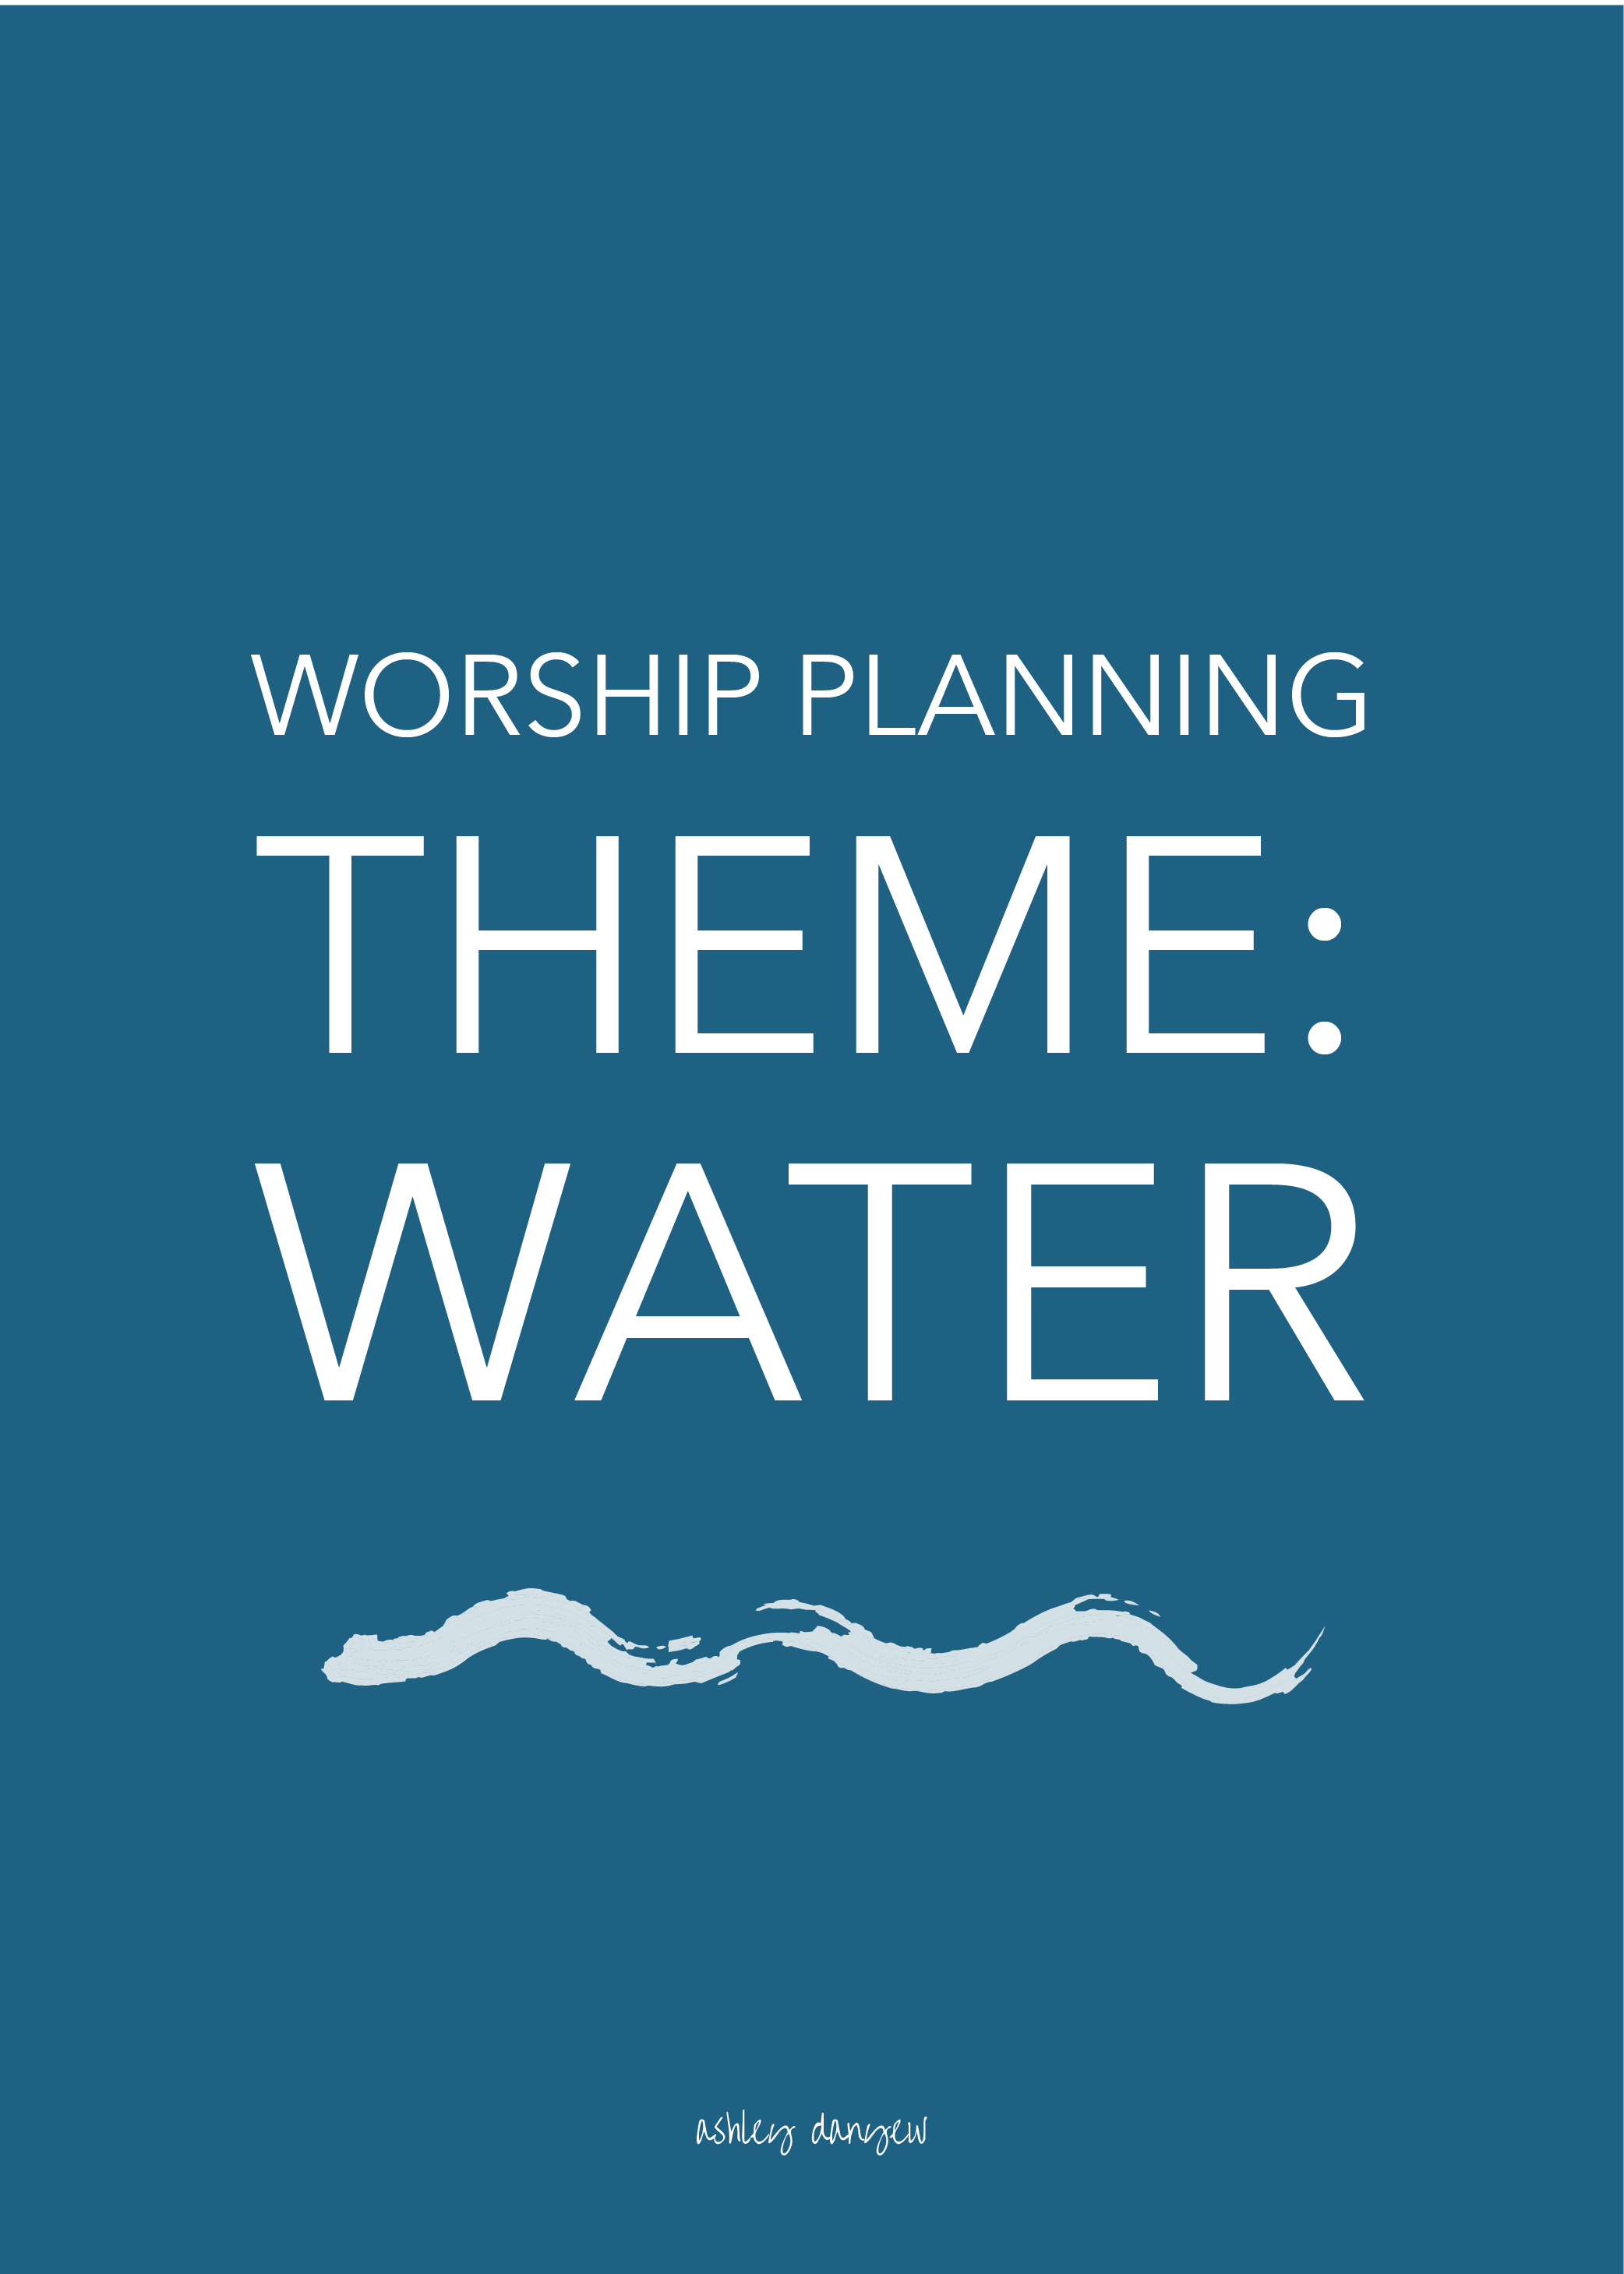 Copy of Worship Planning Theme: Water